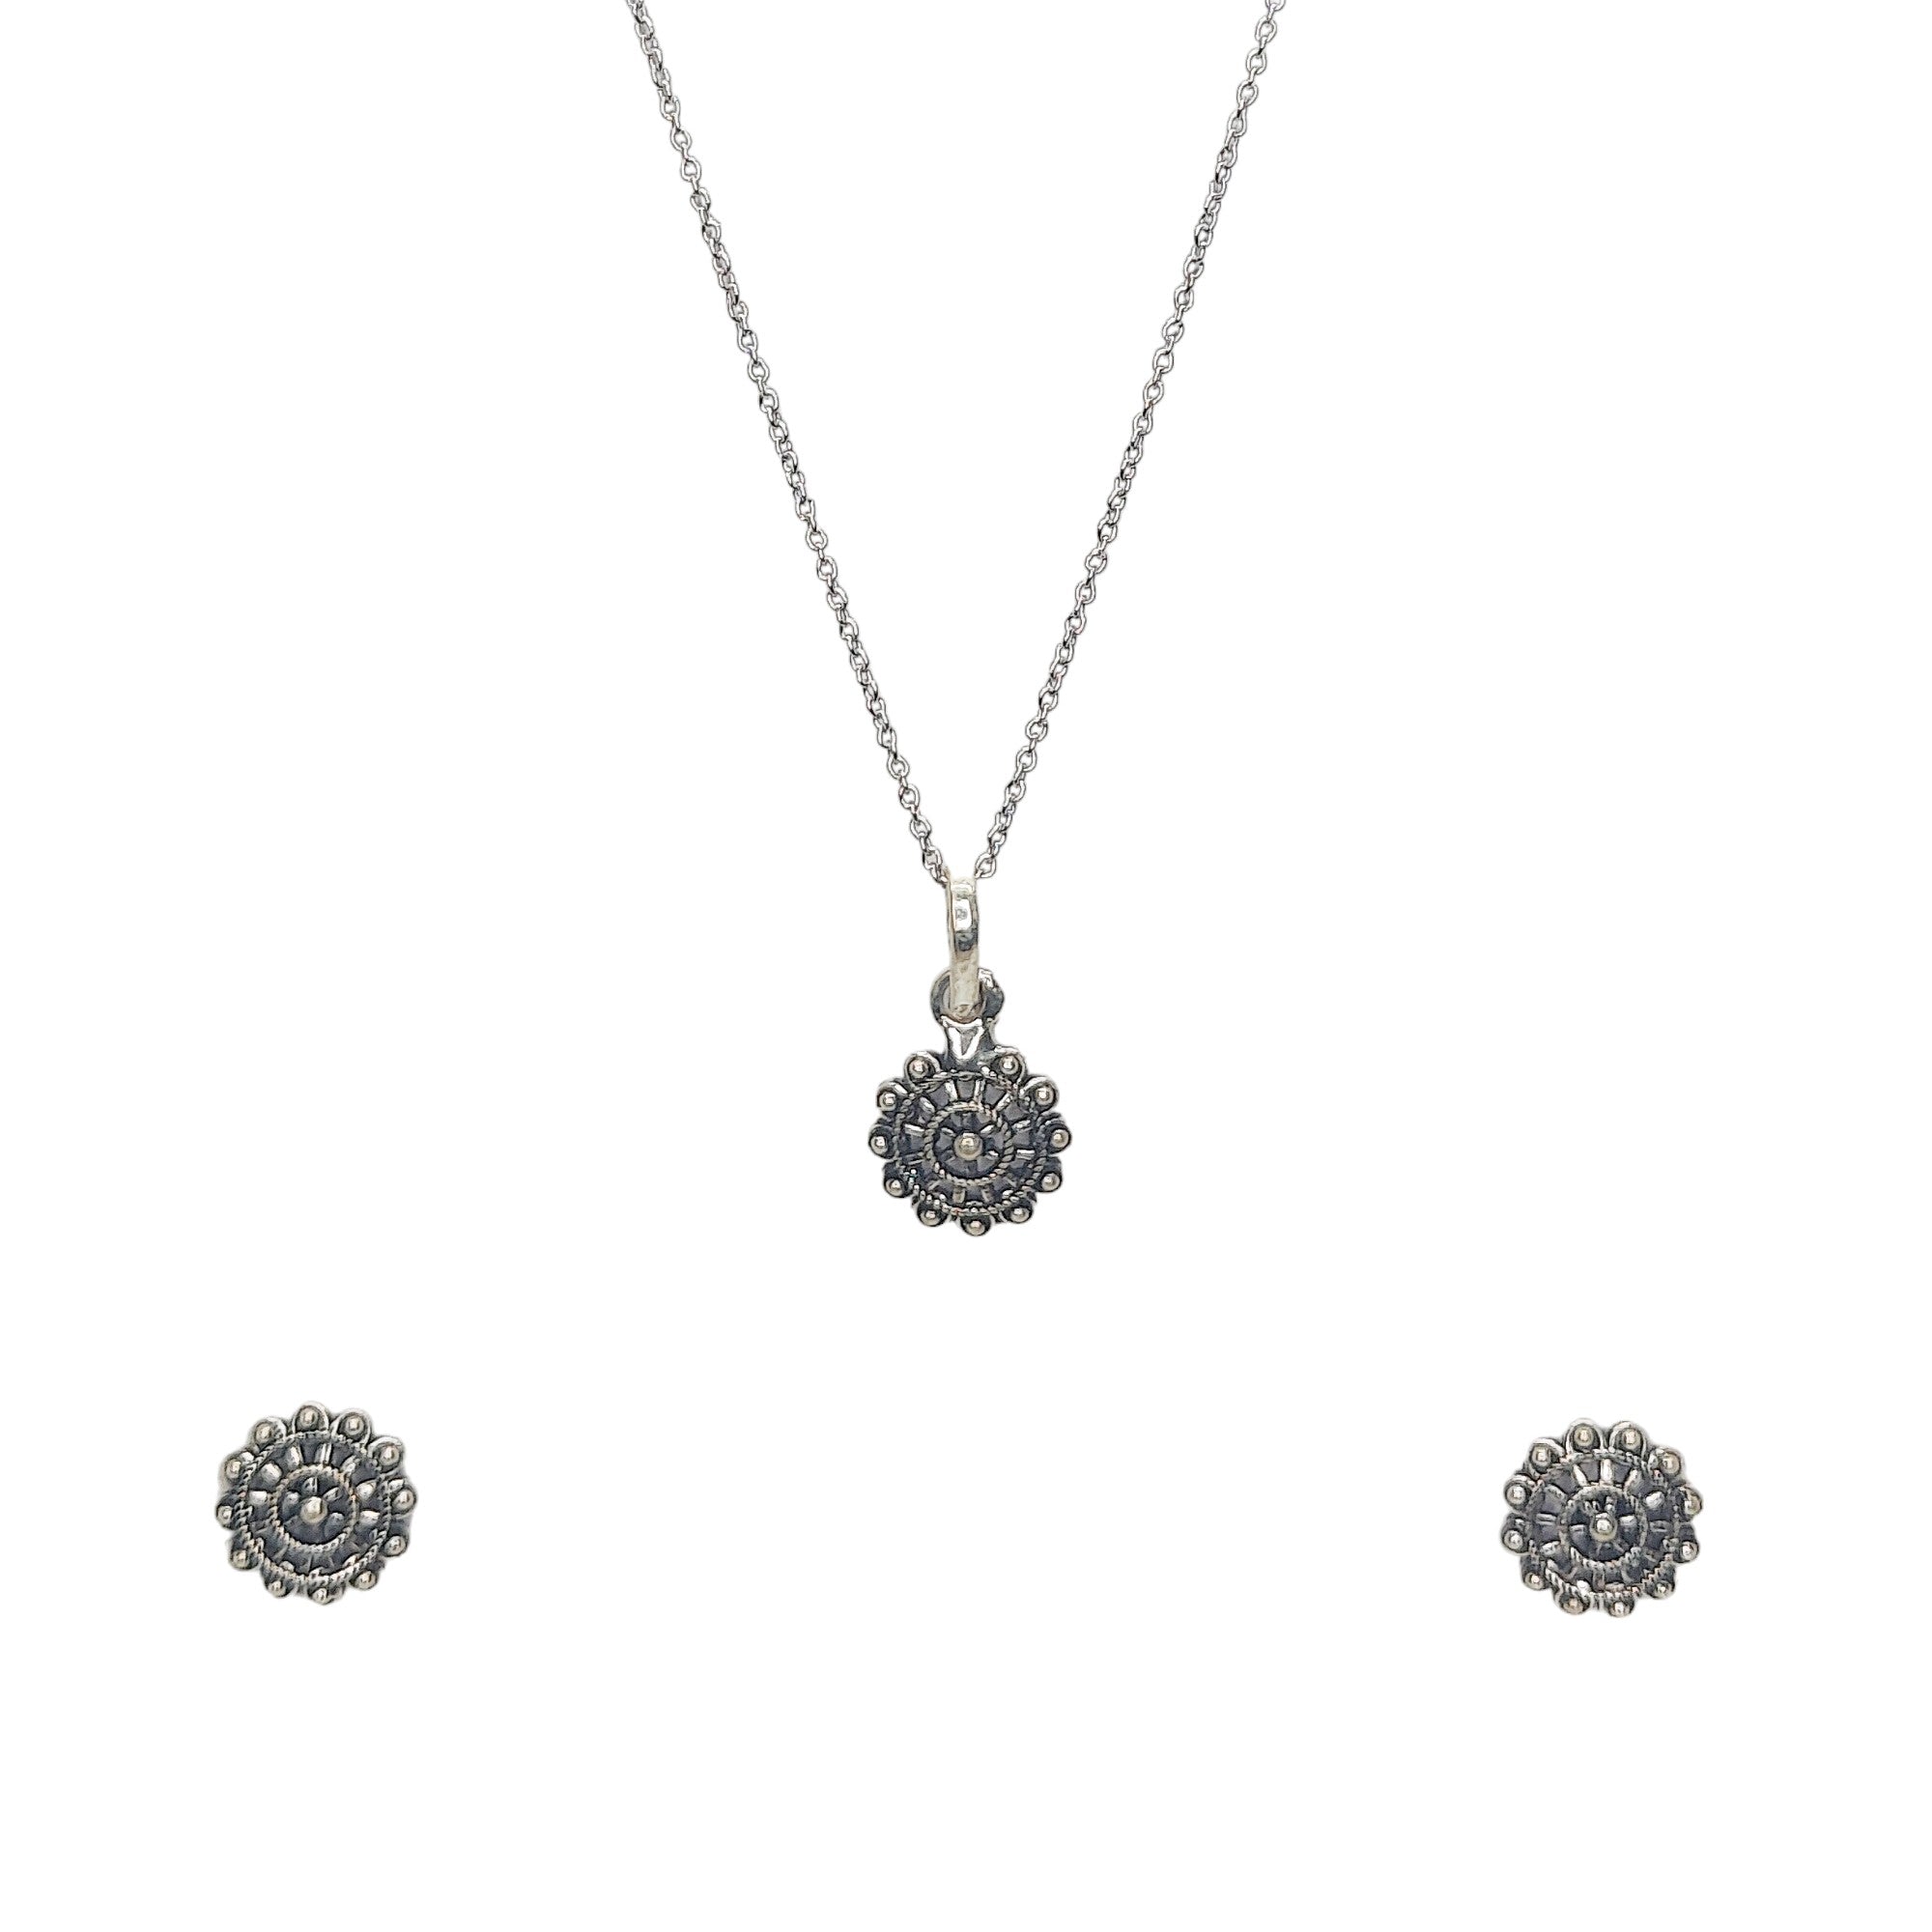 Oxidized Sterling Silver Pendent Set With Chain For Women - Rivansh